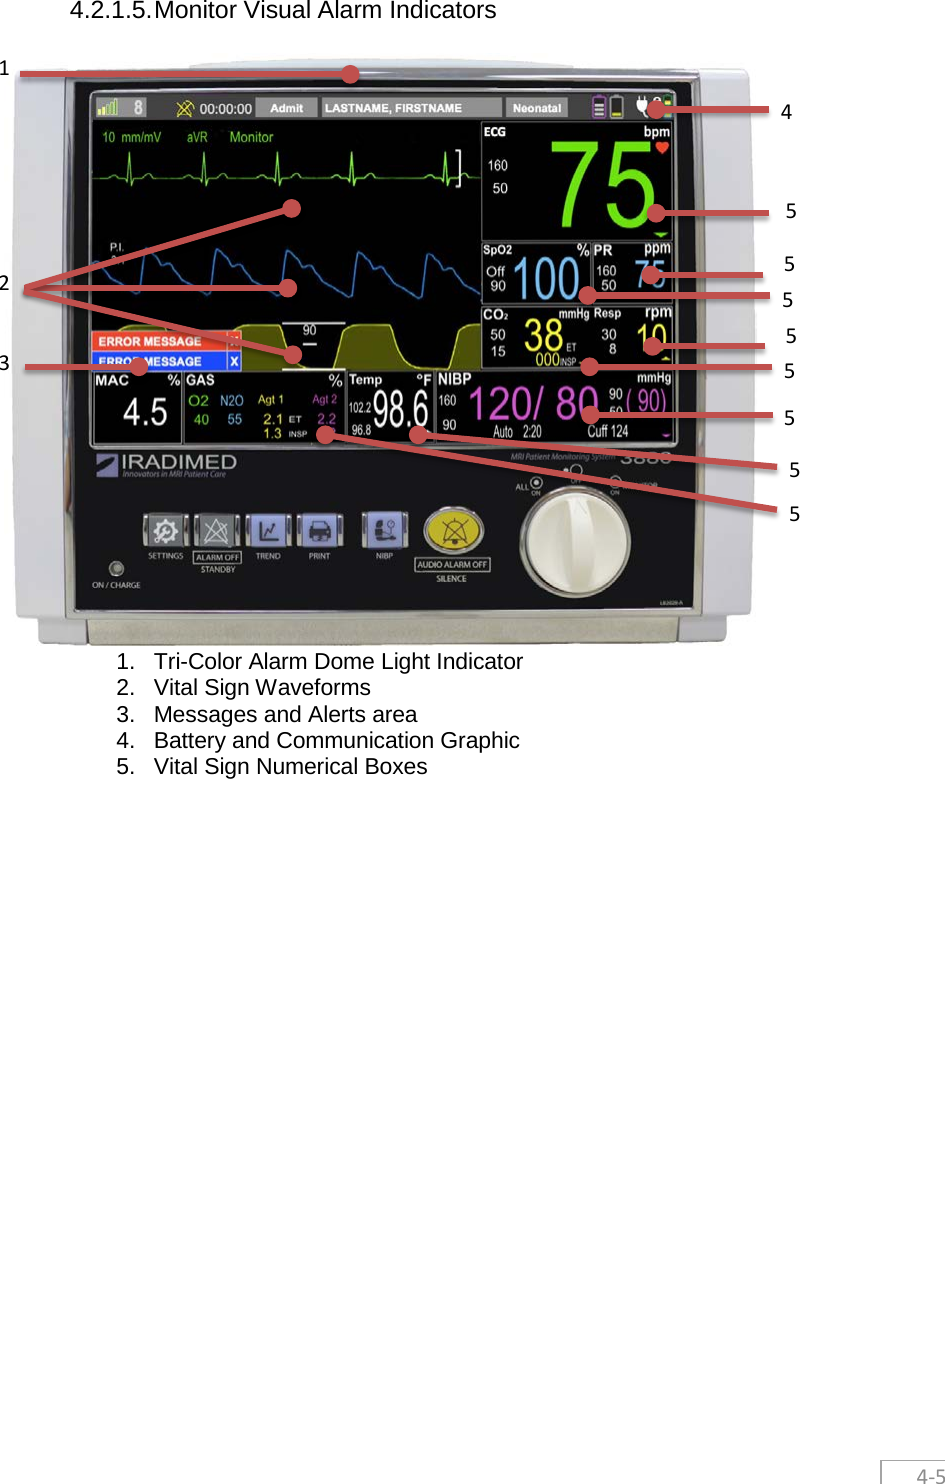  4-5  4.2.1.5. Monitor Visual Alarm Indicators      1. Tri-Color Alarm Dome Light Indicator 2. Vital Sign Waveforms 3. Messages and Alerts area 4. Battery and Communication Graphic 5. Vital Sign Numerical Boxes  5 2 1 4 5 5 5 5 5 5 5 3 